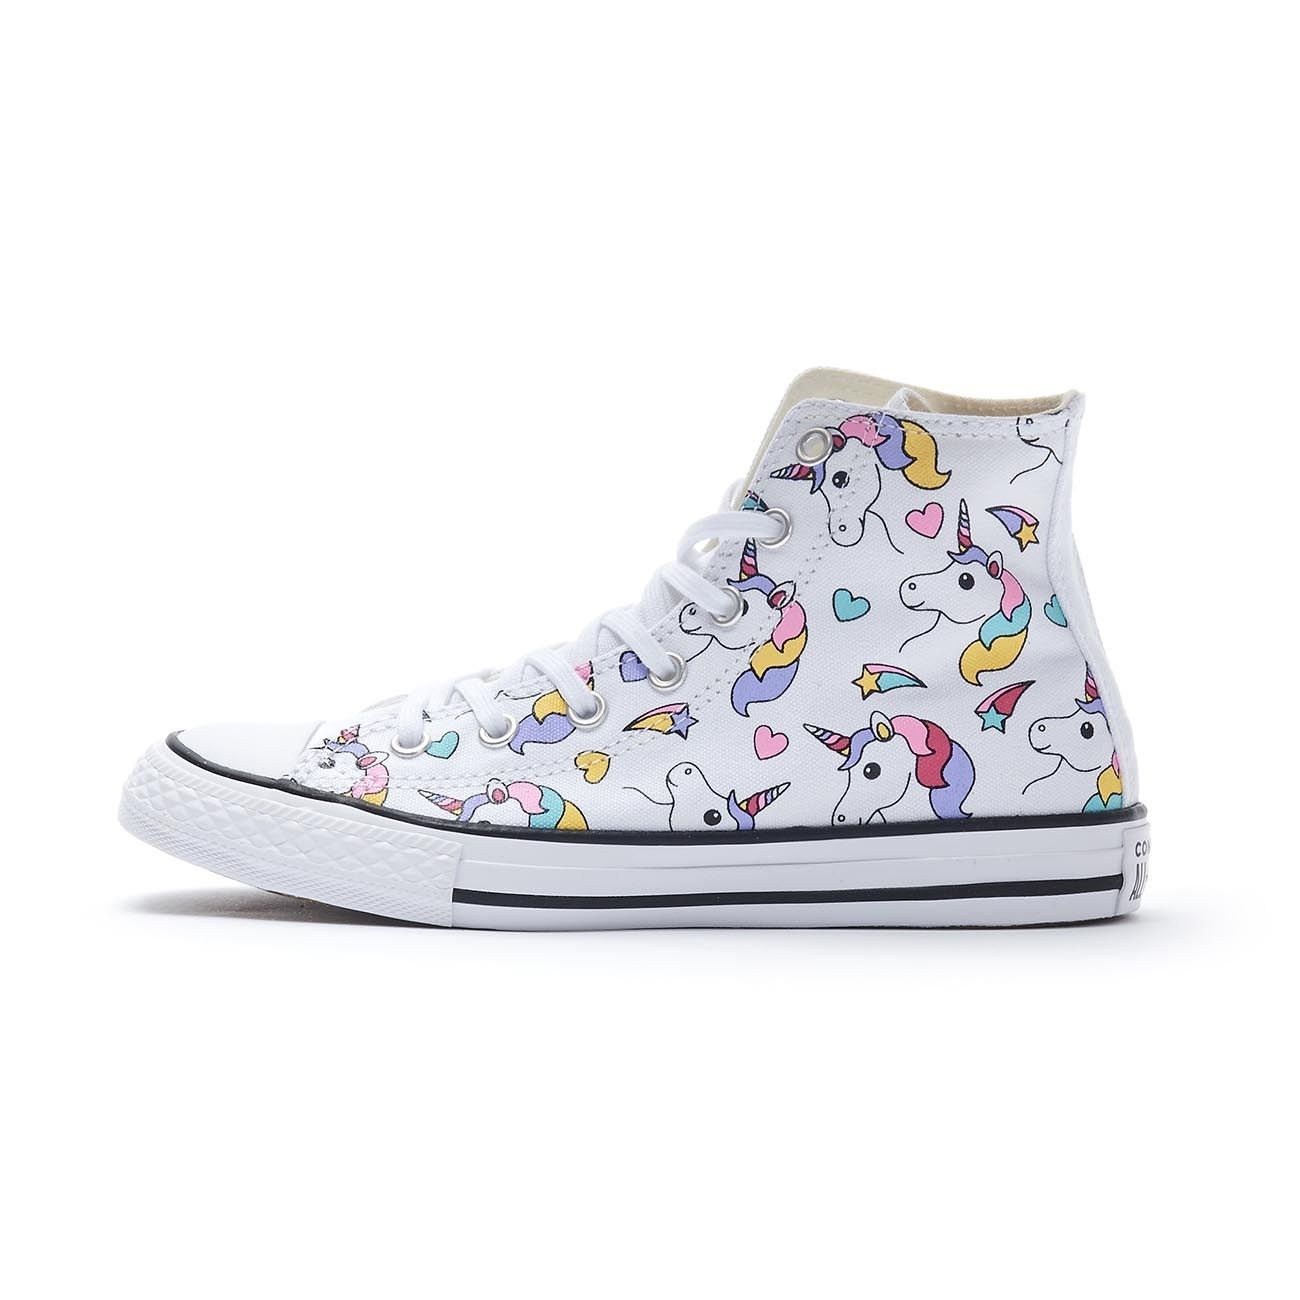 CONVERSE SNEAKERS CHUCK TAYLOR ALL STAR 